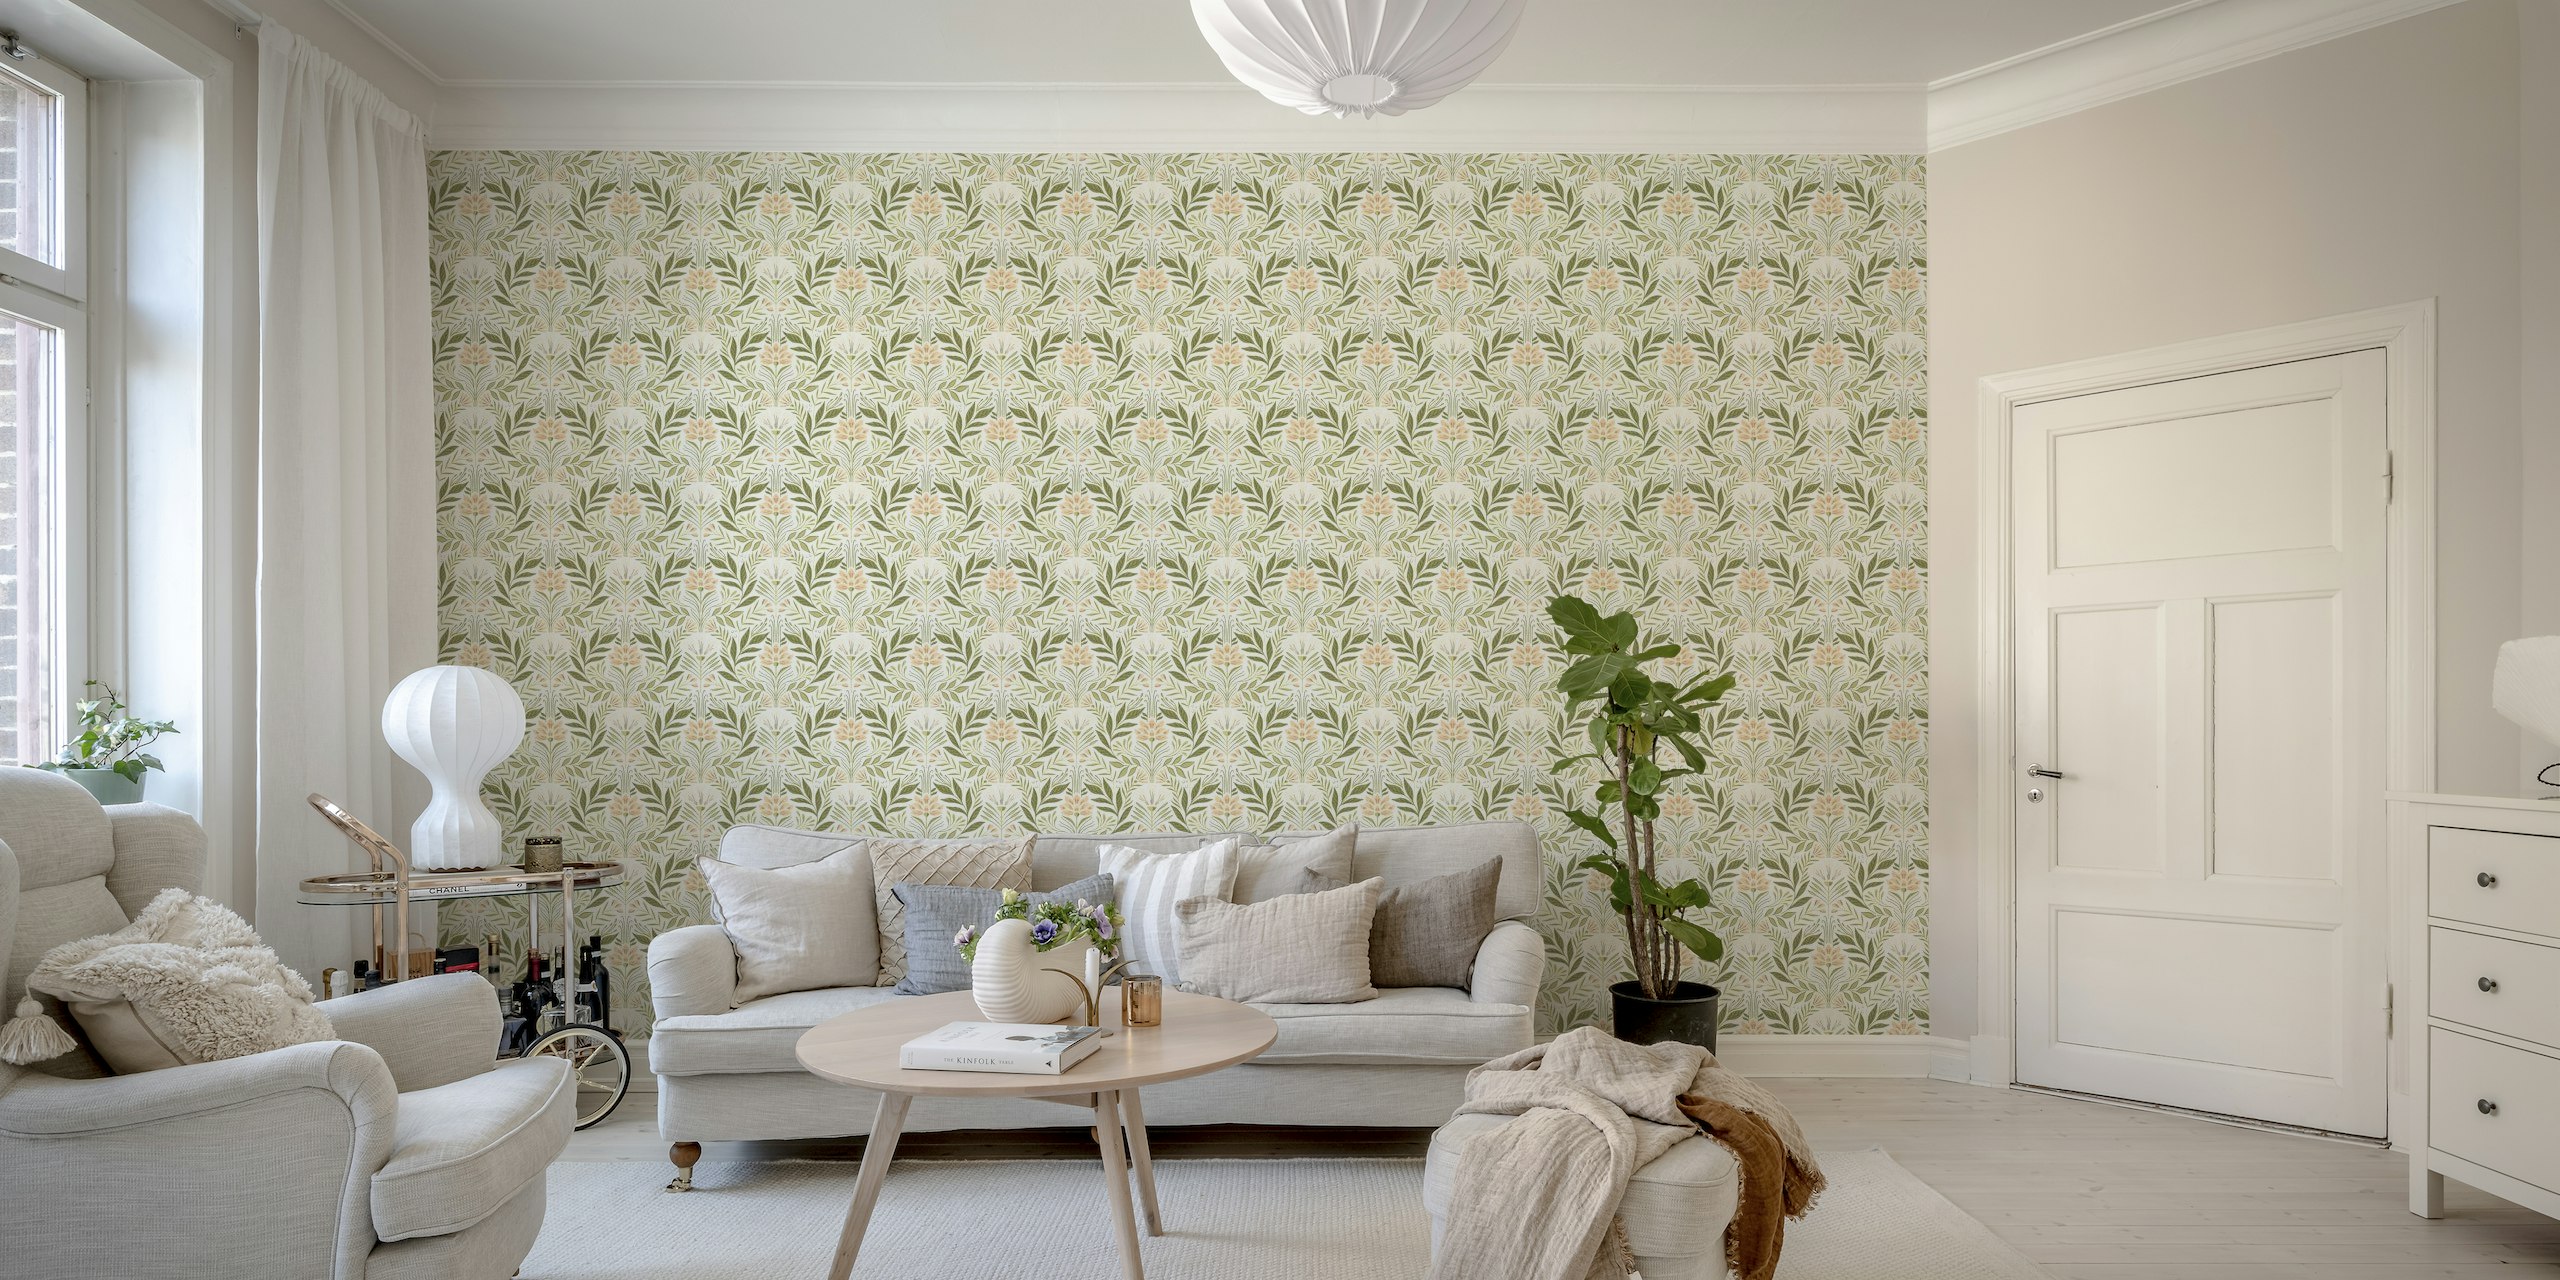 Symmetrical botanical pattern wall mural in soft green, peach, and ivory